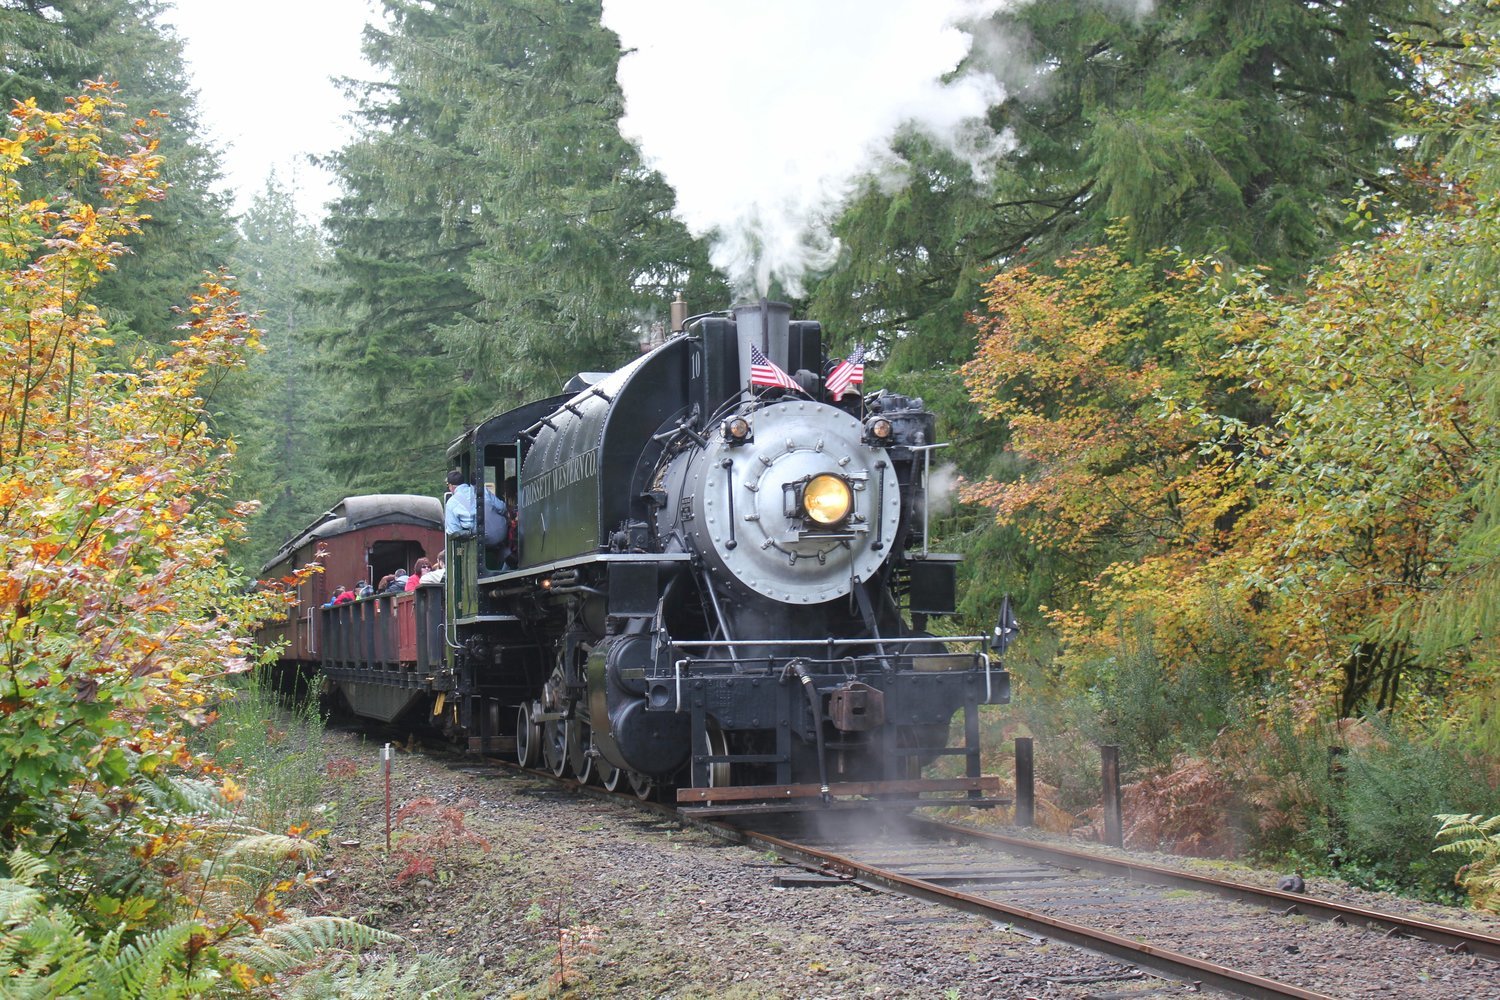 After COVID-19 halted Chelatchie-Prairie Railroad events, volunteers are excited to offer a full line-up this season, including train robbery rides and late summer rides.